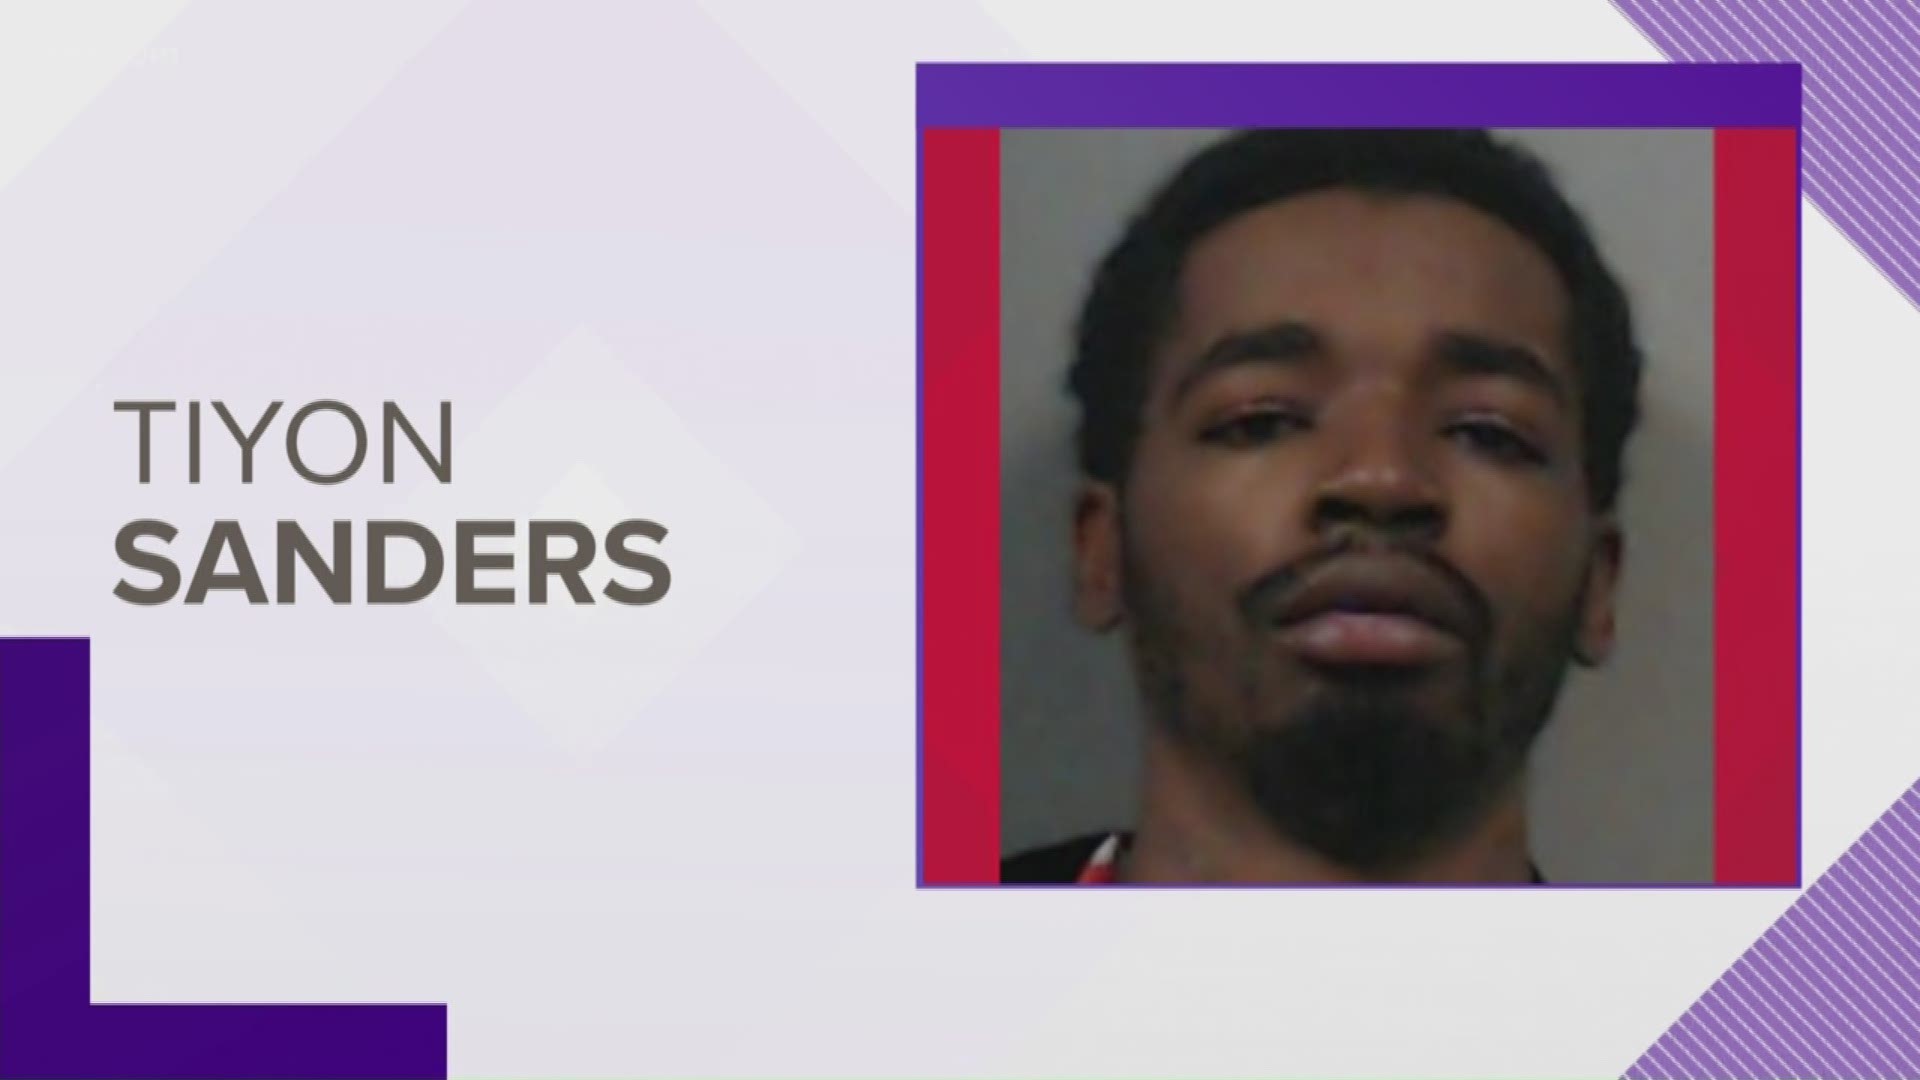 Tiyon Sanders, 26, had been on the run since last May and was arrested early this week.